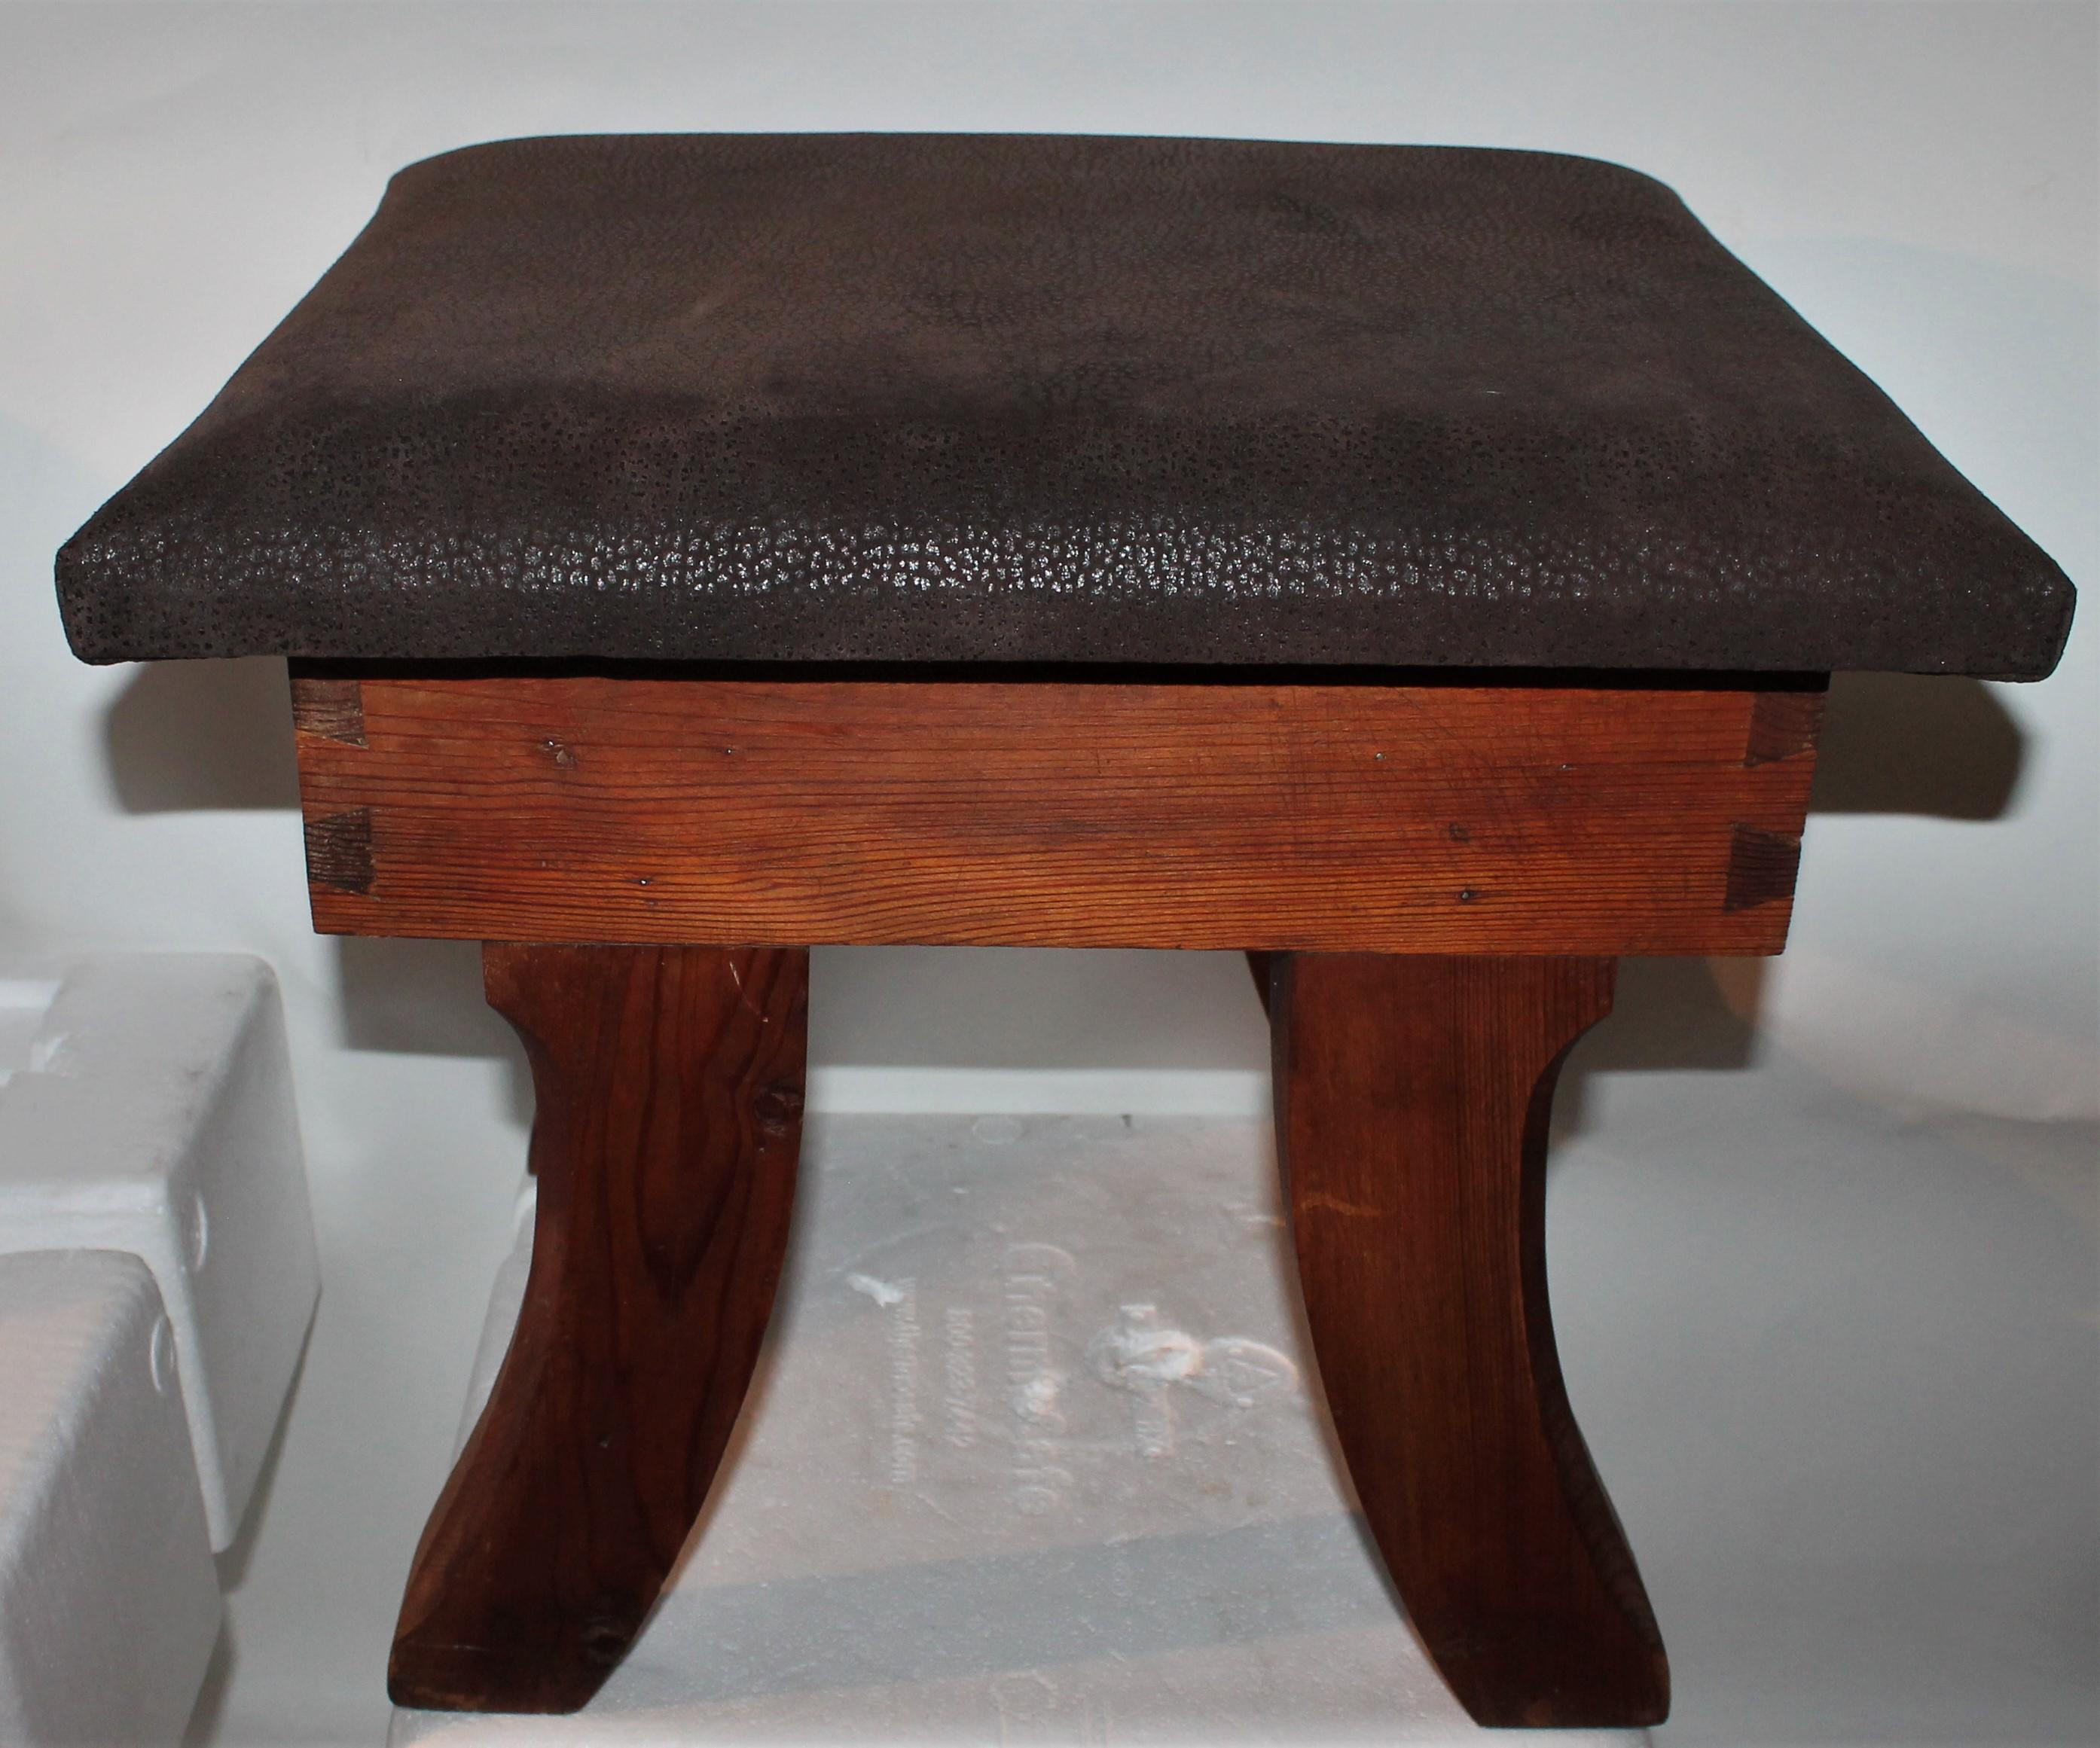 This early dovetailed walnut stool is covered in leather and in very good, sturdy condition. Was found in New England.